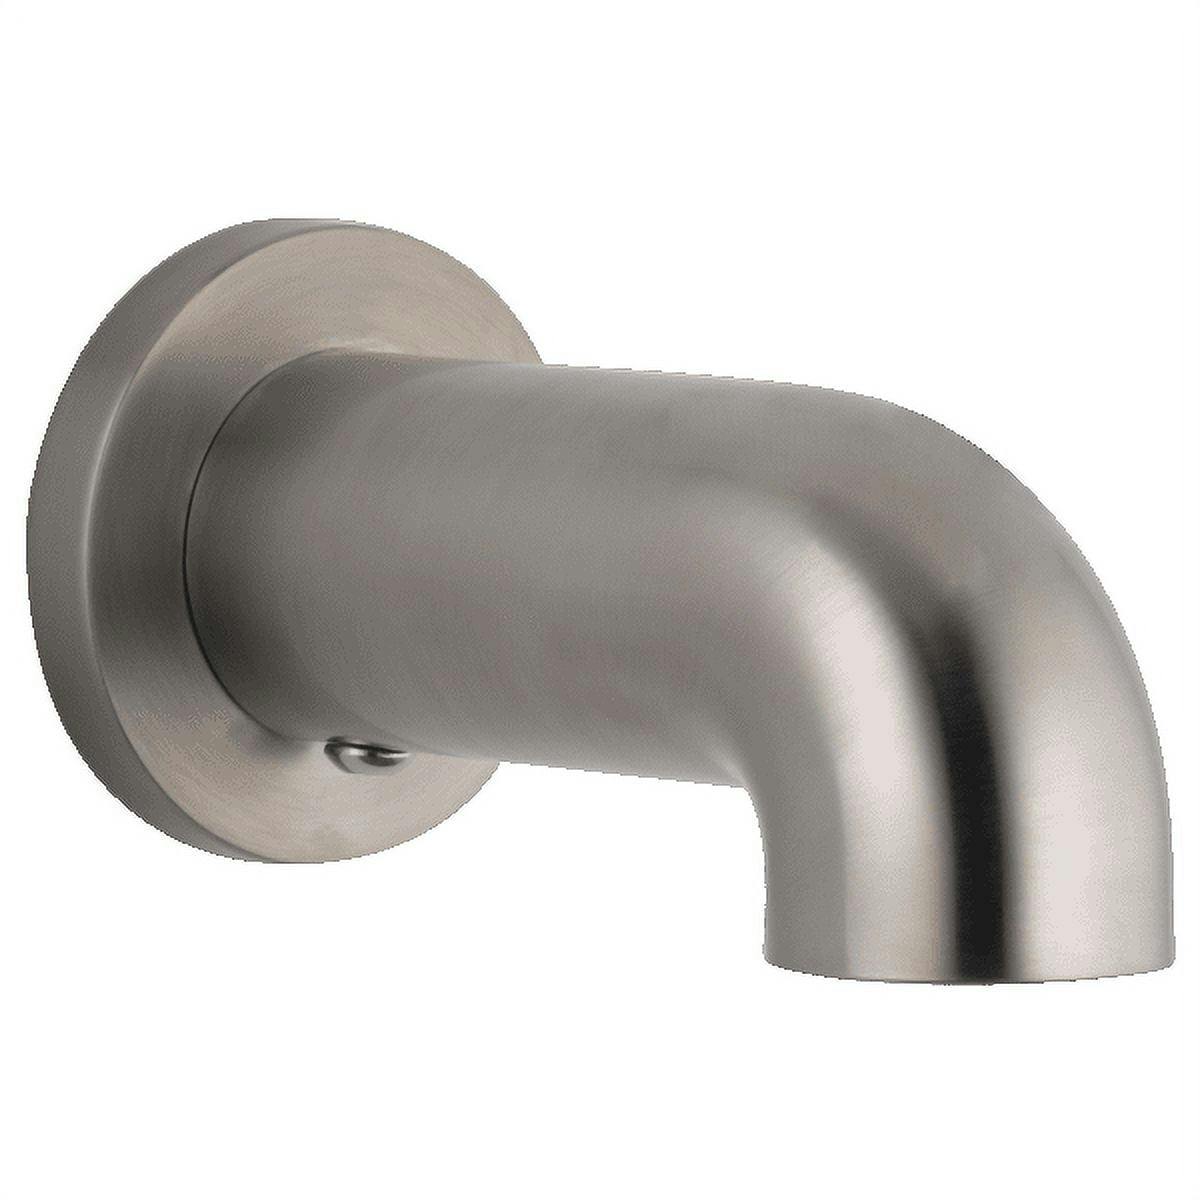 Trinsic Stainless Non-Diverter Wall Mounted Tub Spout Trim